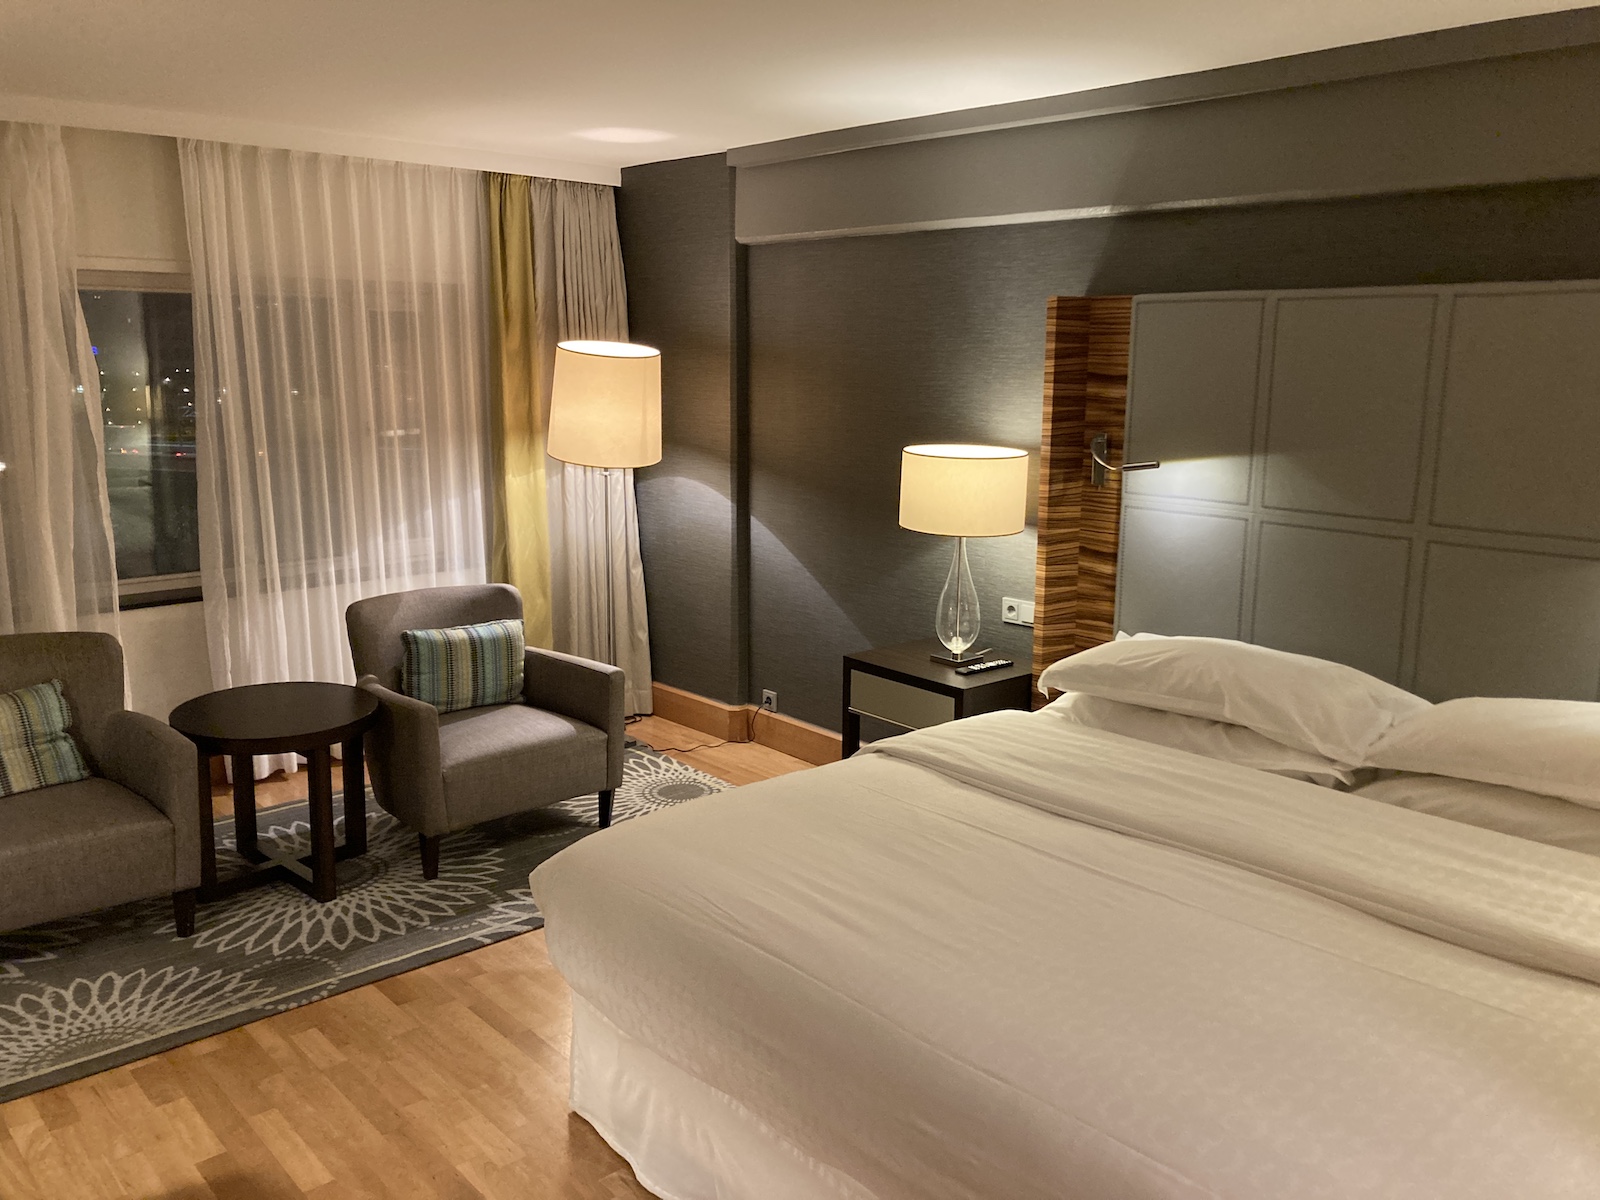 Image of panoramic suite bedroom at Sheraton Stockholm Hotel, featured in my review.